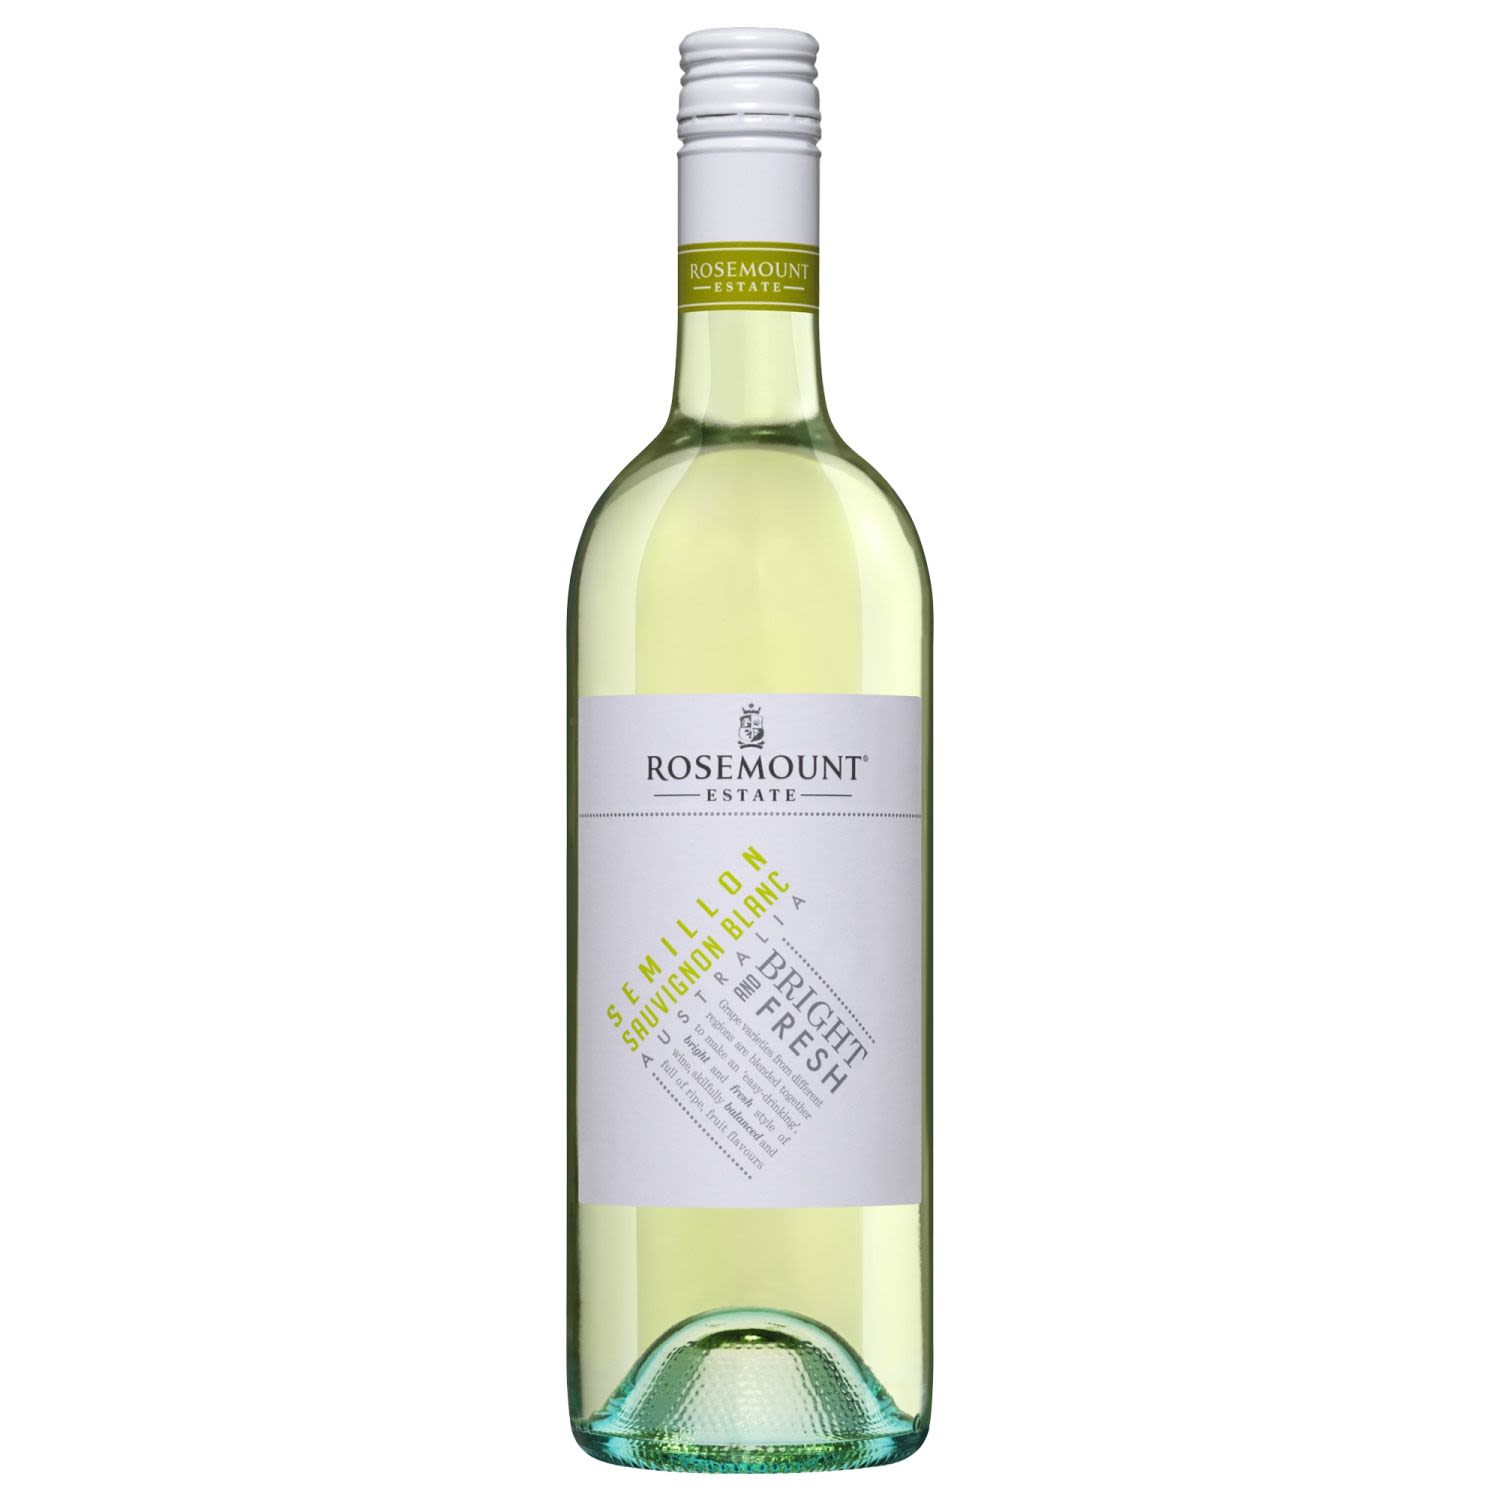 Fresh & inviting aromas of gooseberry & green apple greet the nose with a citrus lift. Tropical fruit & passionfruit flavours combine beautifully with citrus, pineapple notes. This is a bright, zesty wine with crisp, lingering flavours.<br /> <br />Alcohol Volume: 12.50%<br /><br />Pack Format: Bottle<br /><br />Standard Drinks: 7.4</br /><br />Pack Type: Bottle<br /><br />Country of Origin: Australia<br /><br />Region: South Eastern Australia<br /><br />Vintage: '2018<br />